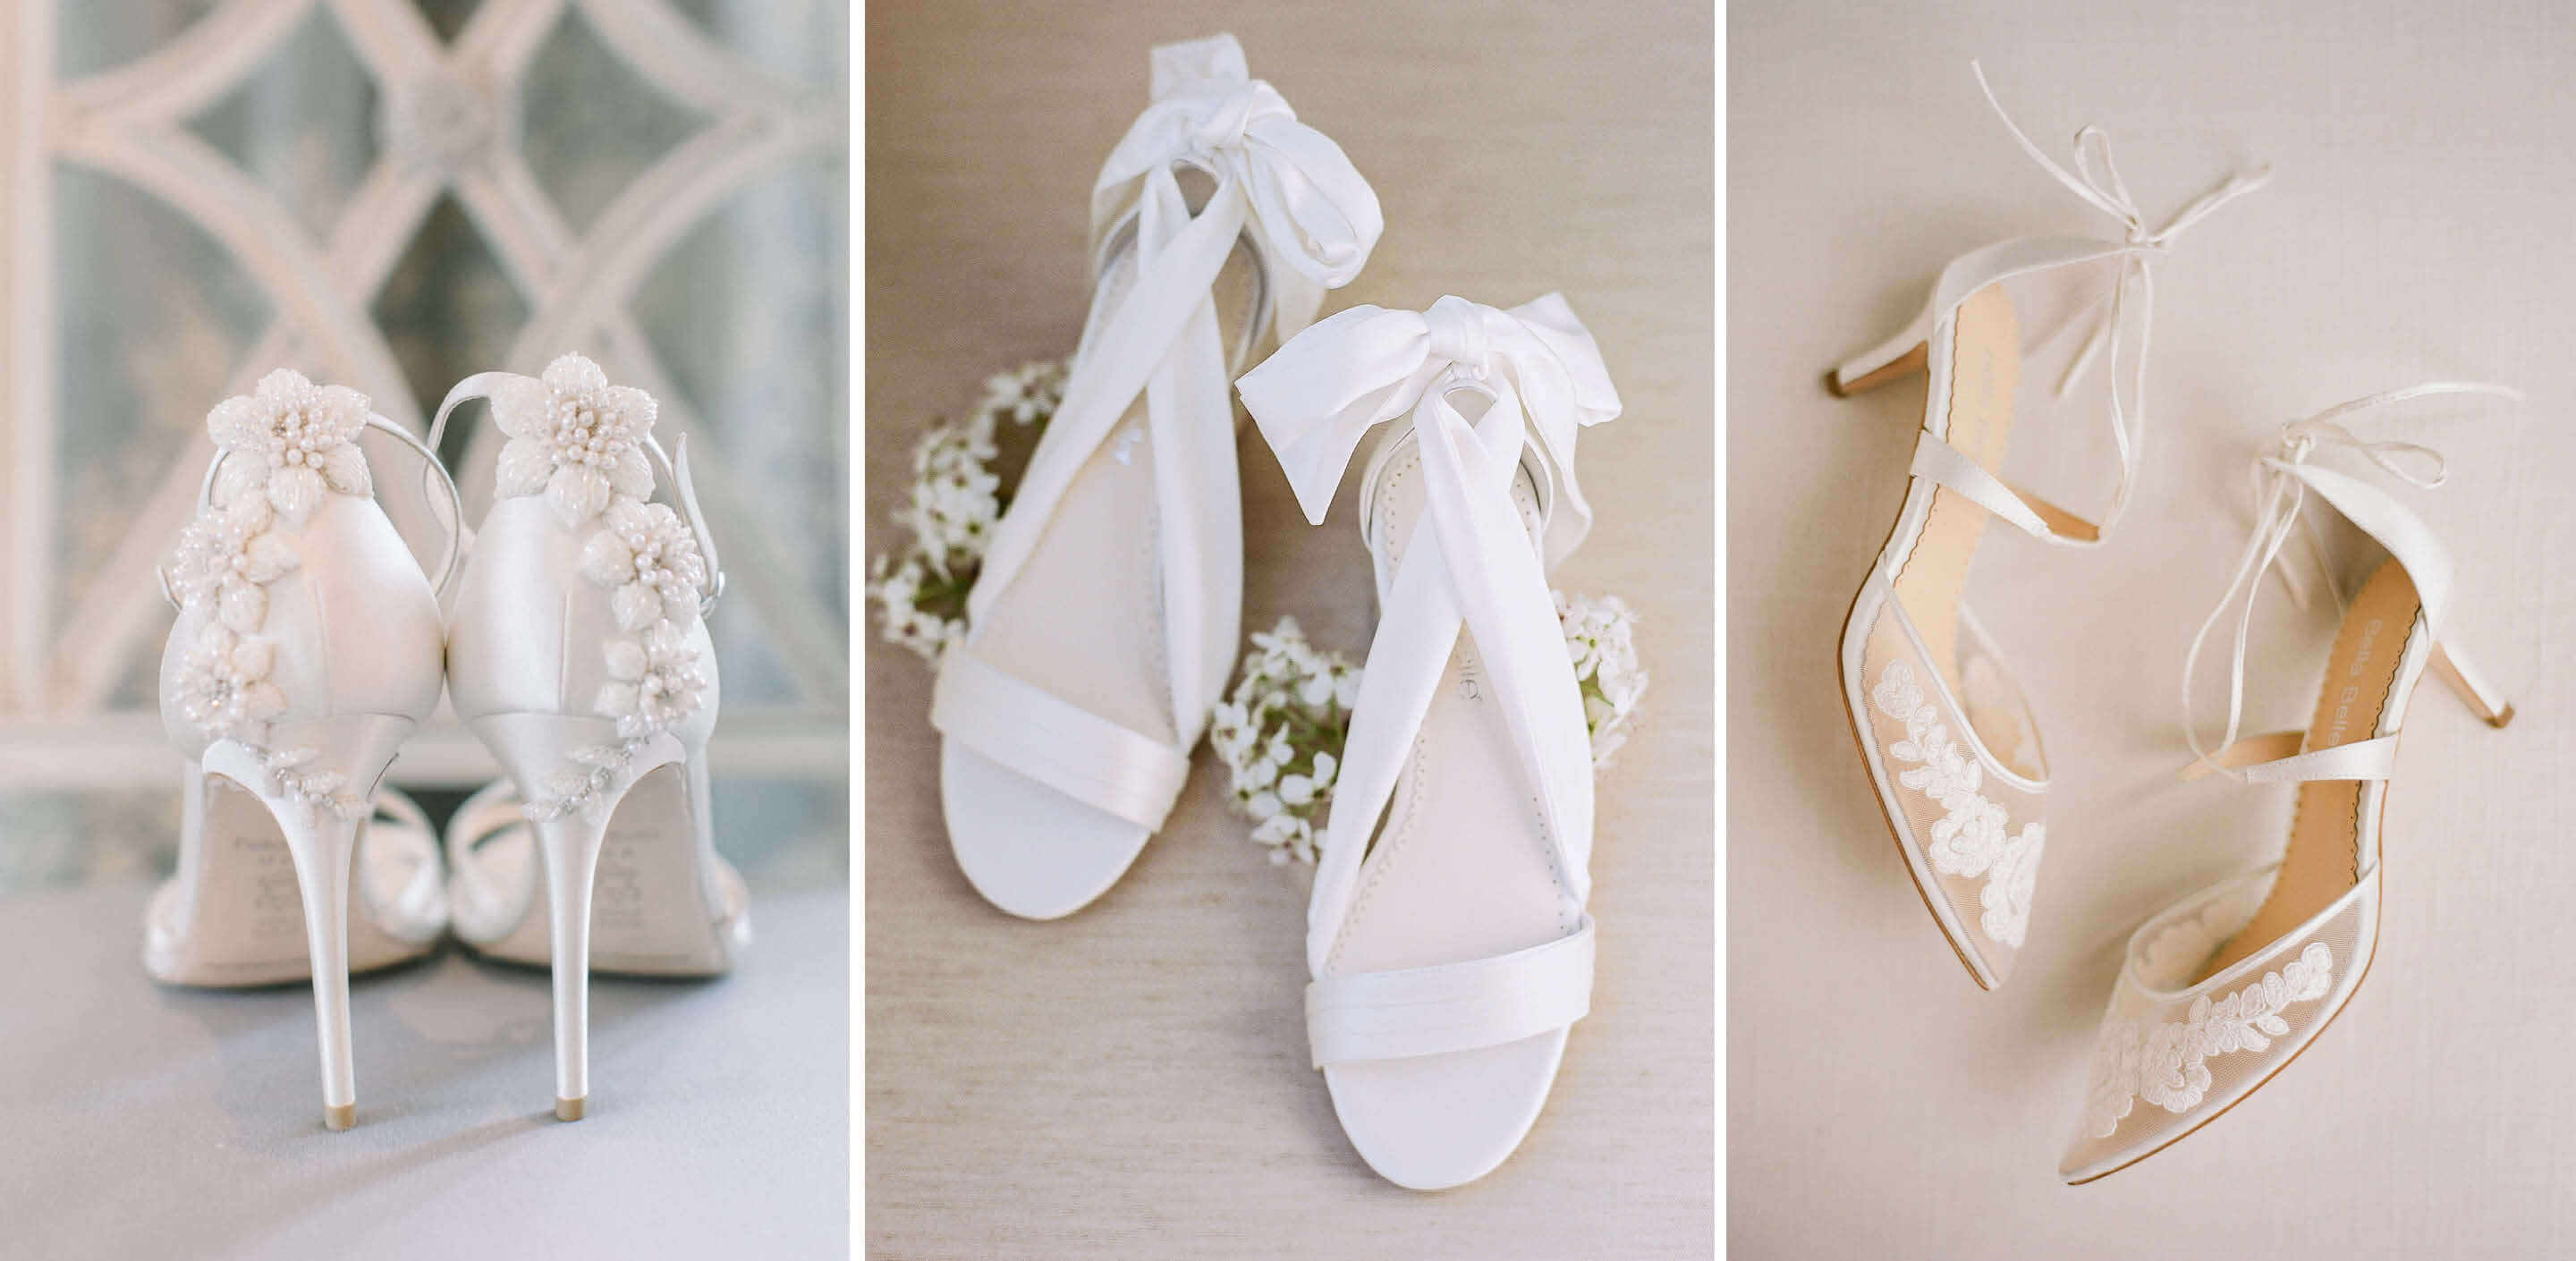 Jimmy Choo wedding shoes - comfortable for dancing? : r